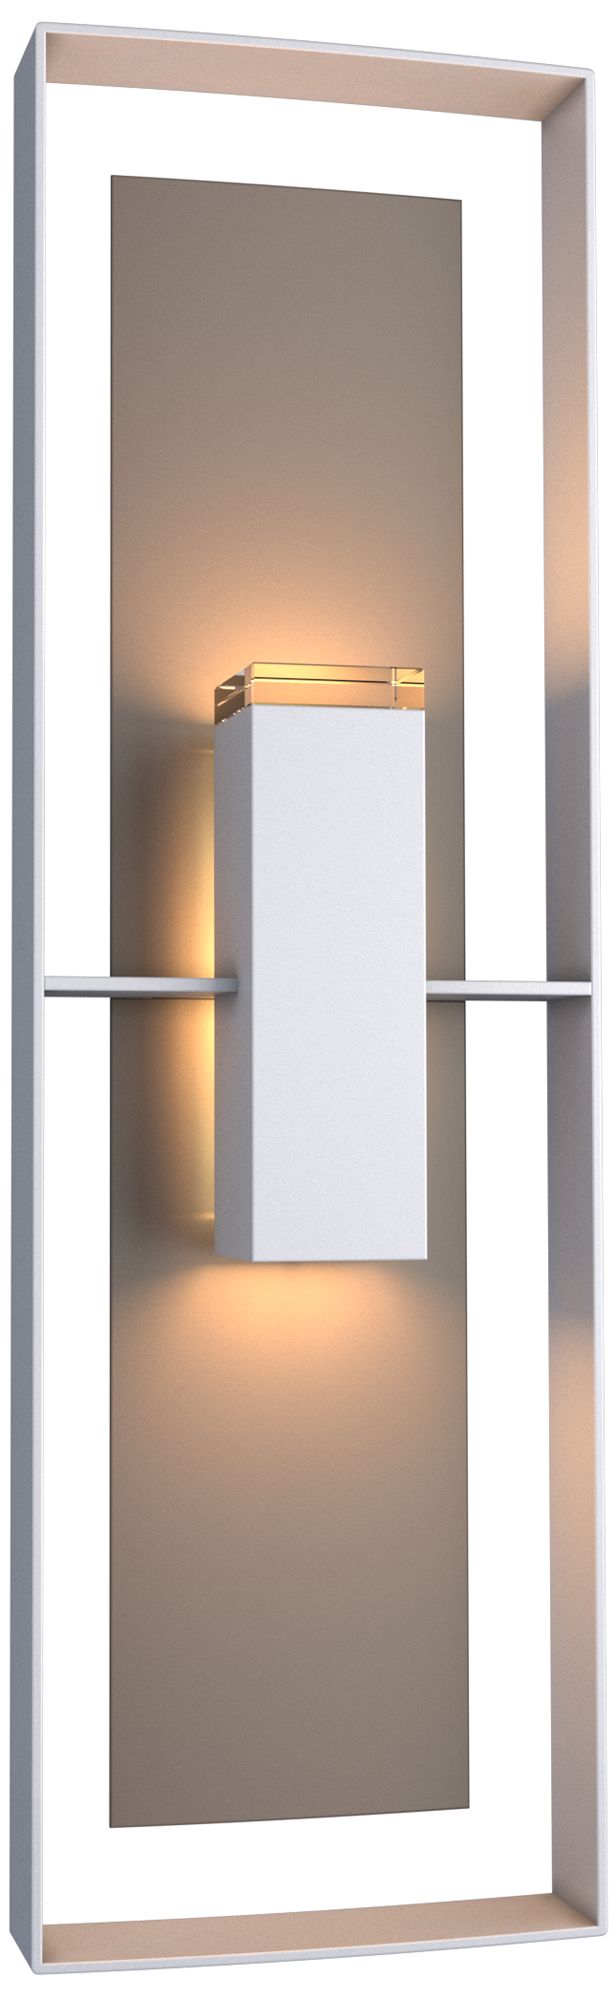 Shadow Box Tall Outdoor Sconce - Steel Finish - Smoke Accents - Clear Glass